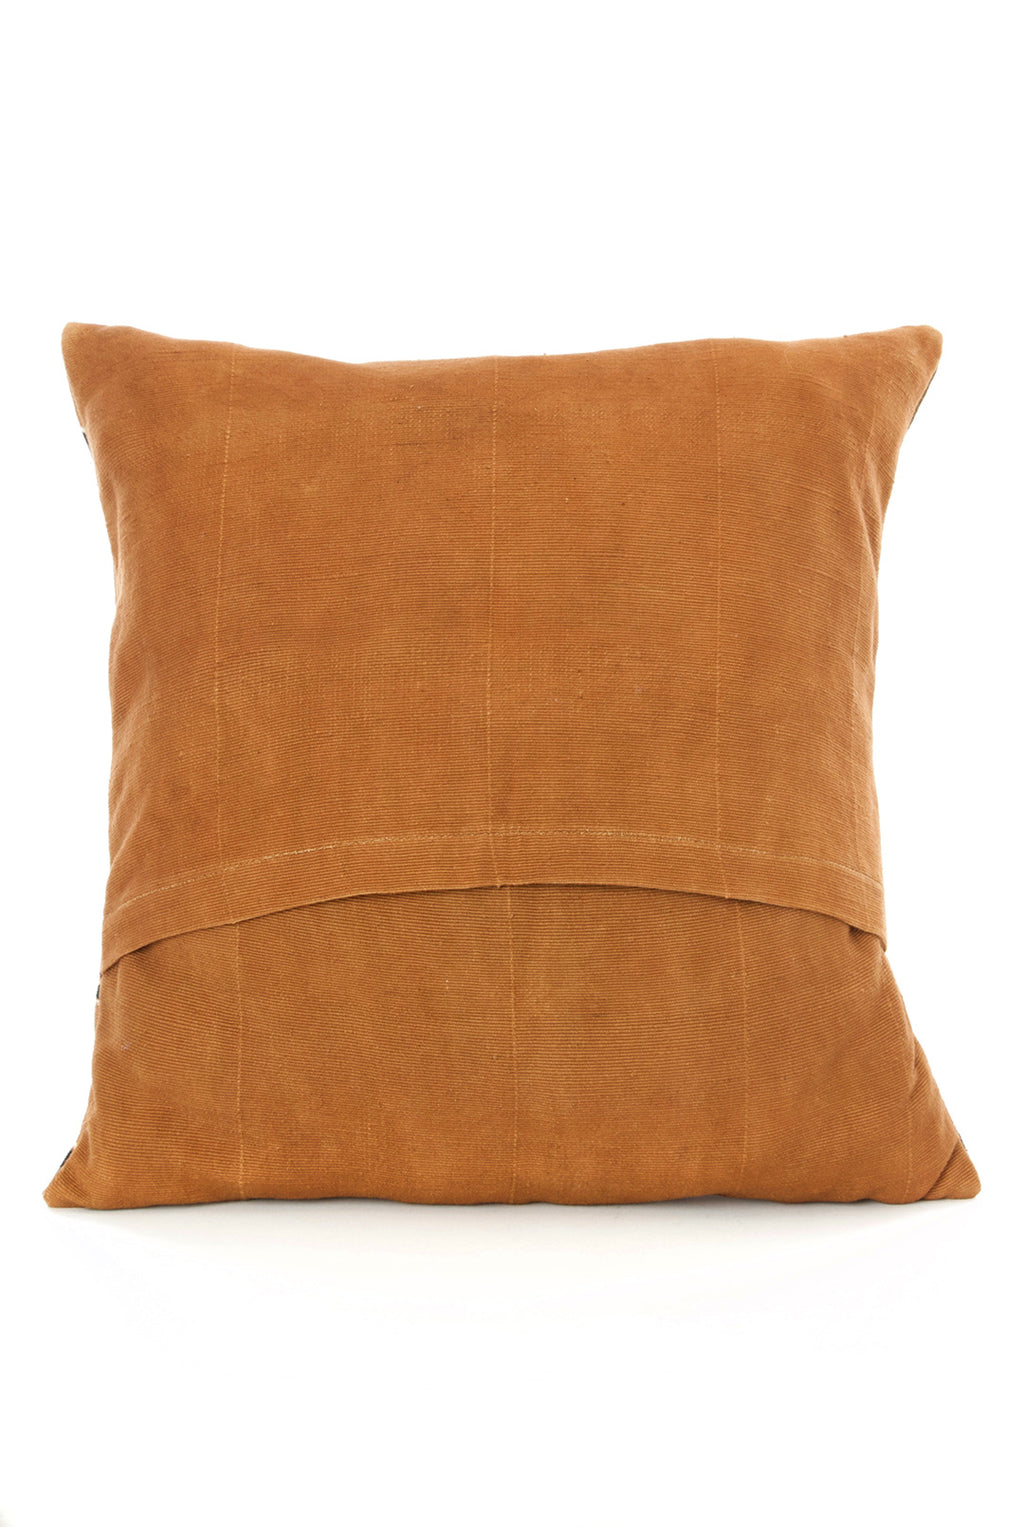 Desert Cathedral Organic Cotton Pillow Cover